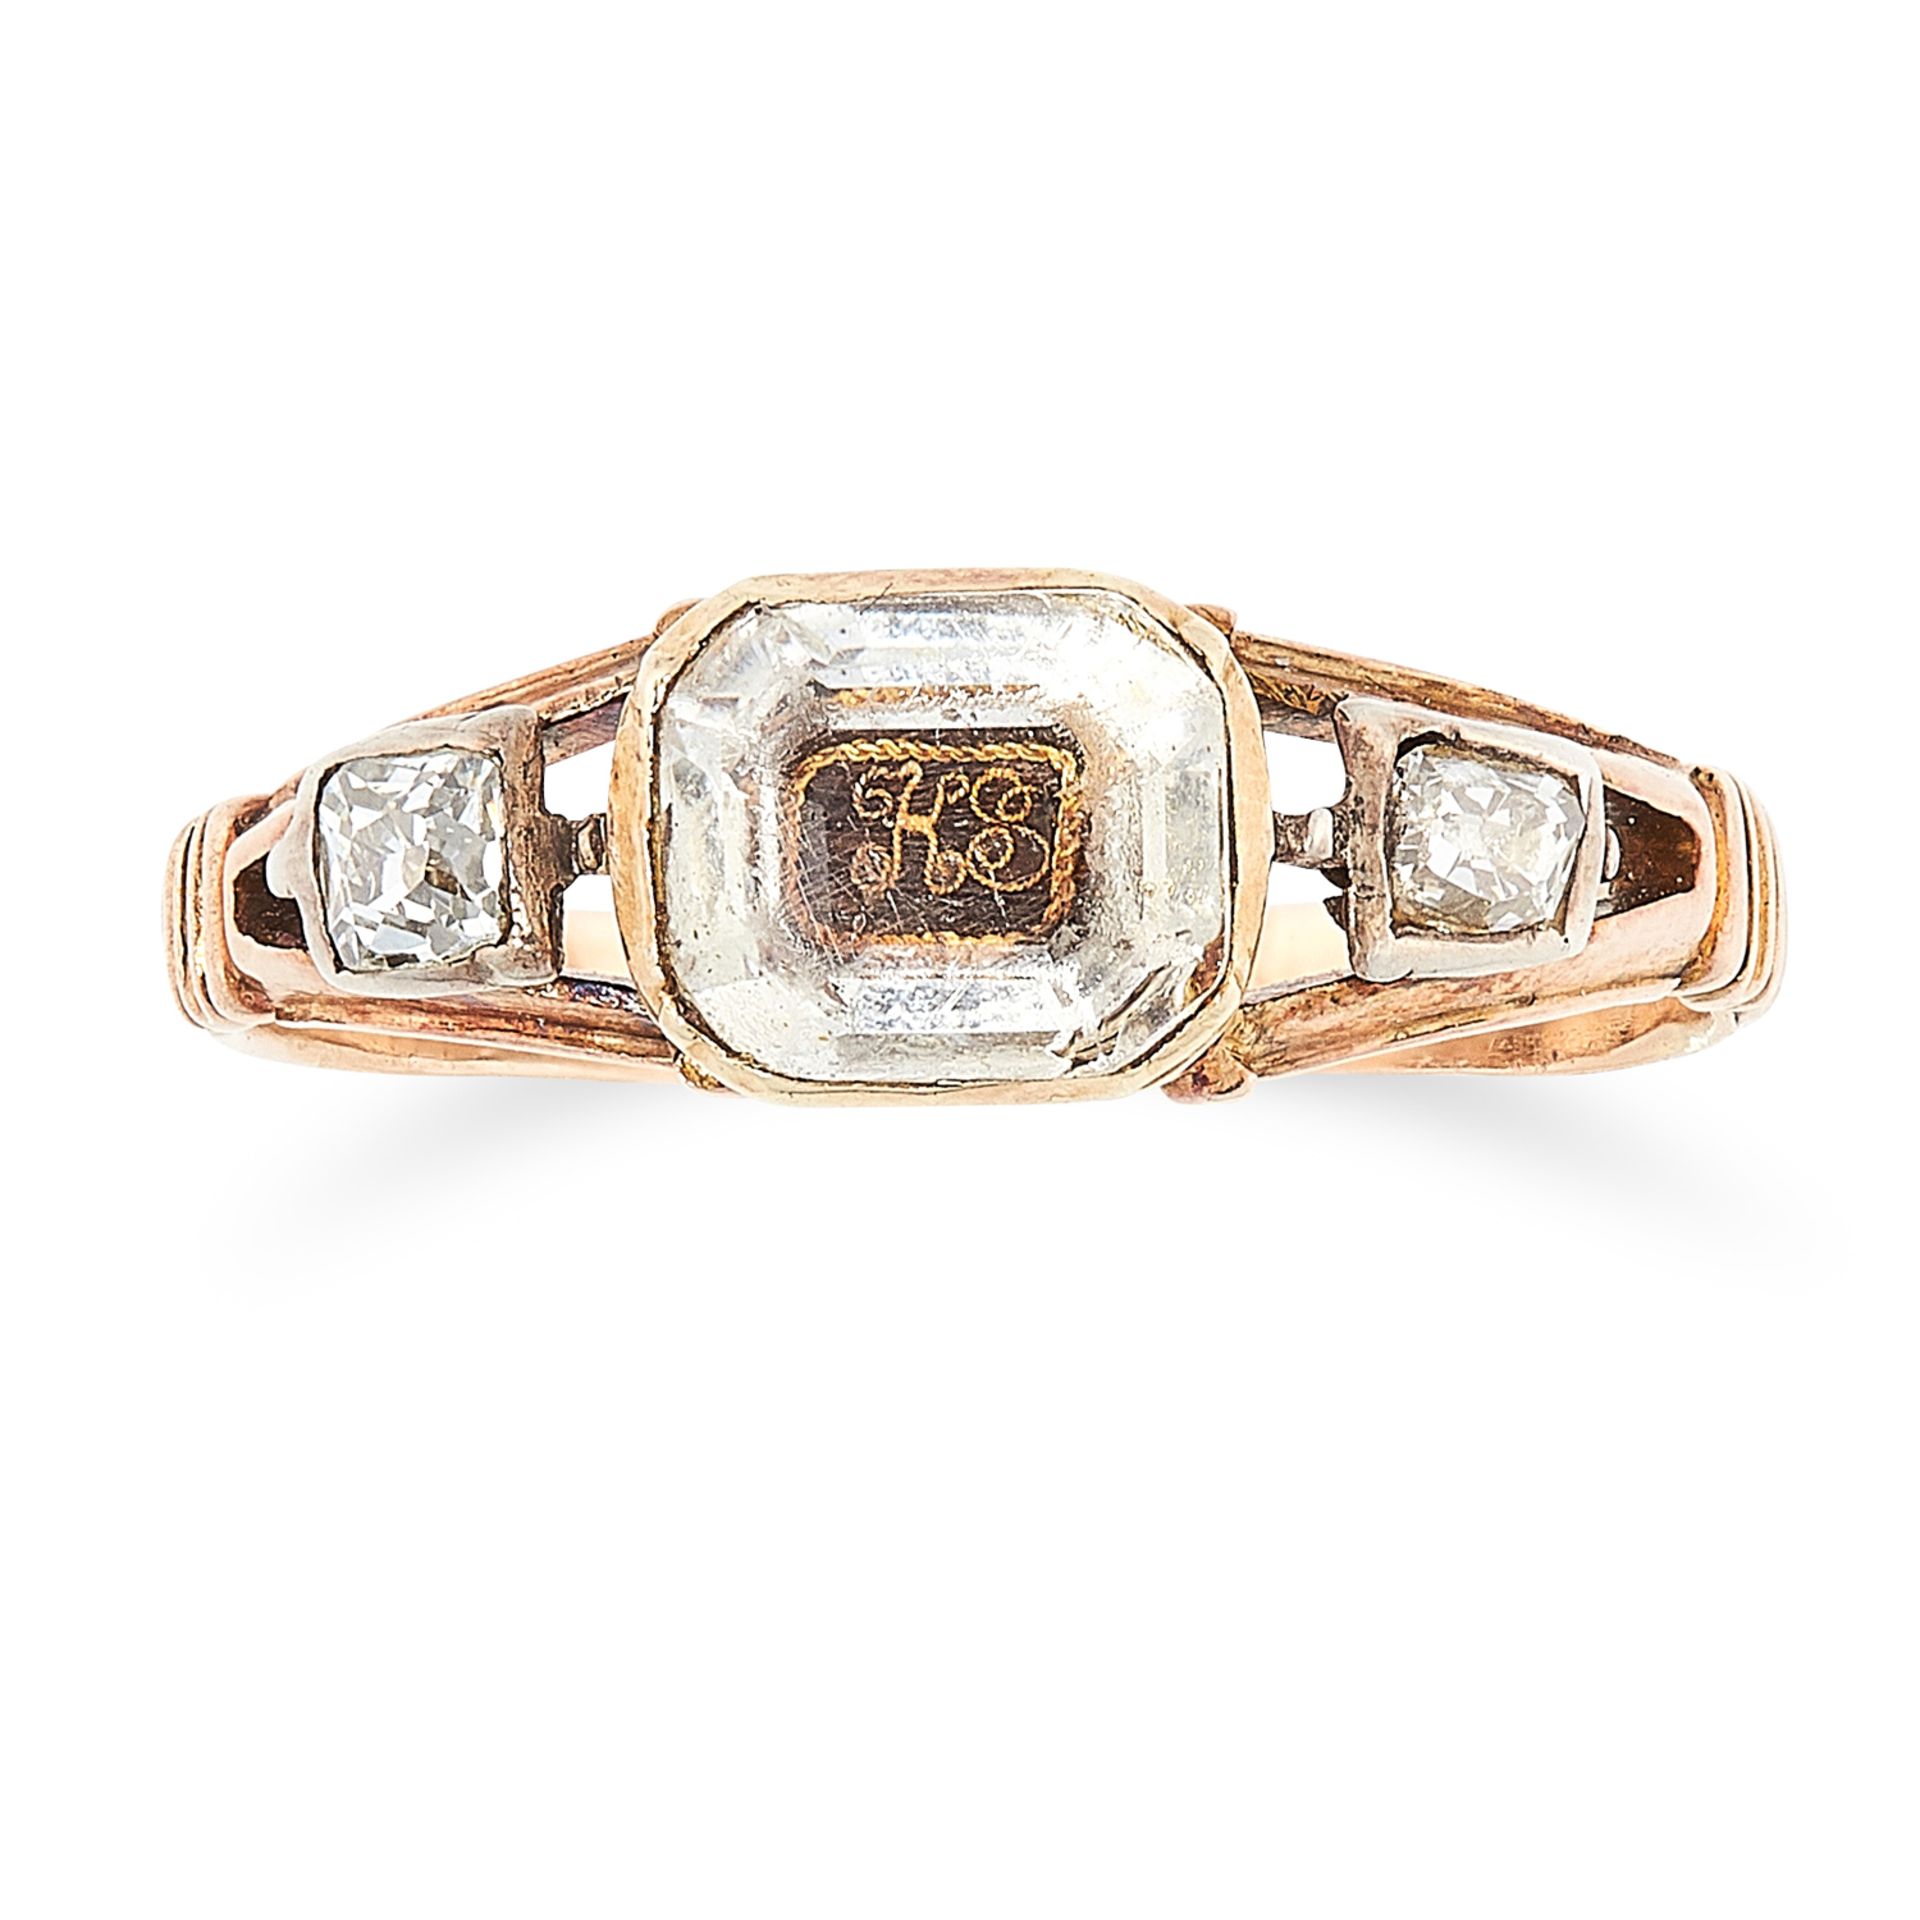 AN ANTIQUE STUART CRYSTAL AND DIAMOND MOURNING RING, 18TH CENTURY in high carat yellow gold, set